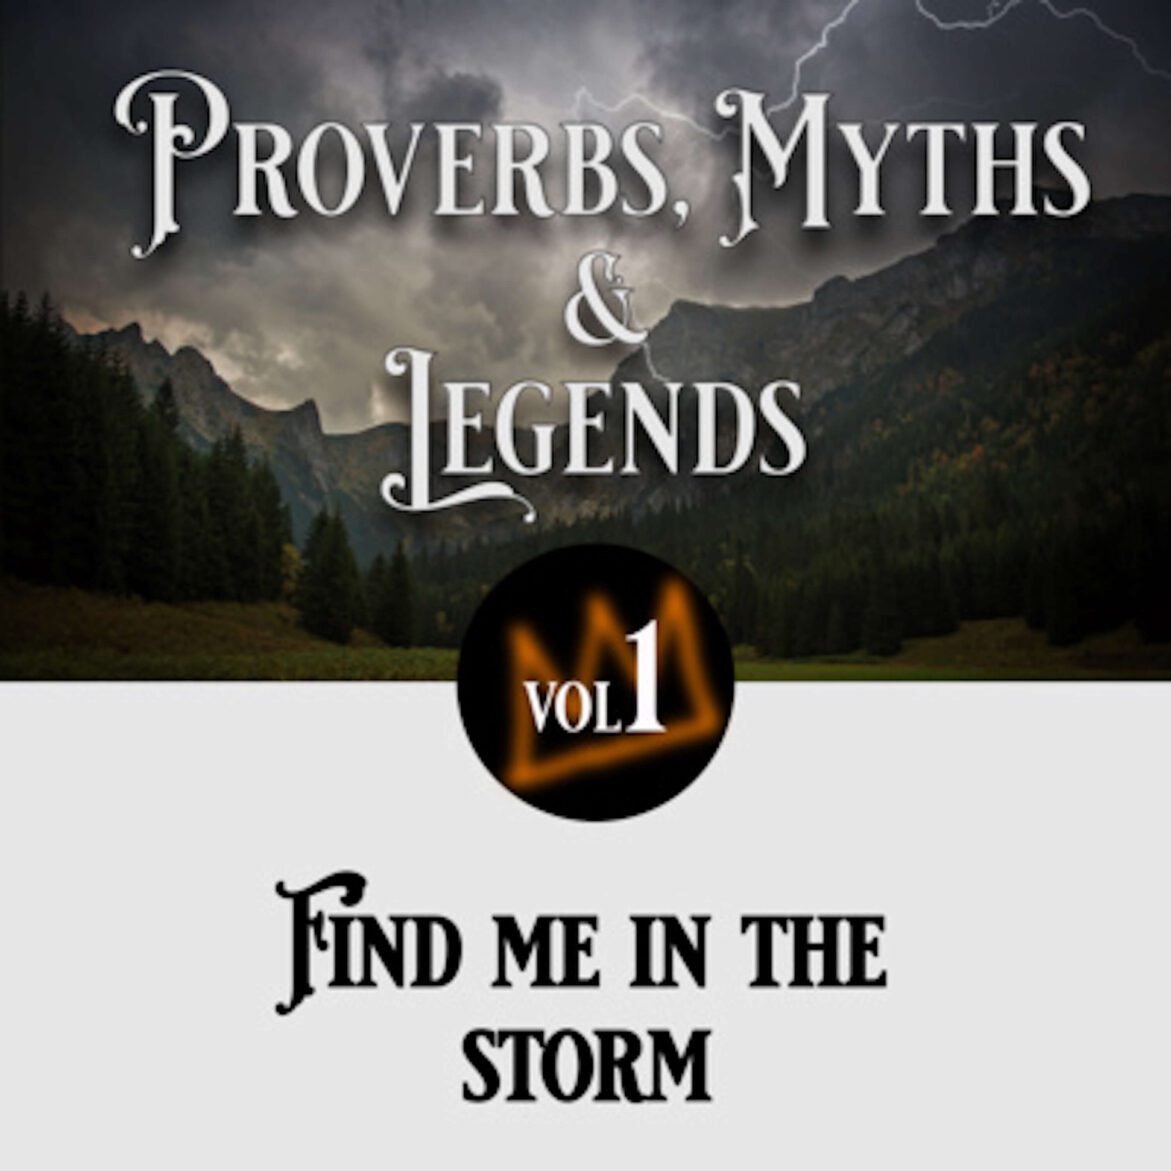 Black Podcasting - 25: Proverbs, myths and legends: Find me in the storm